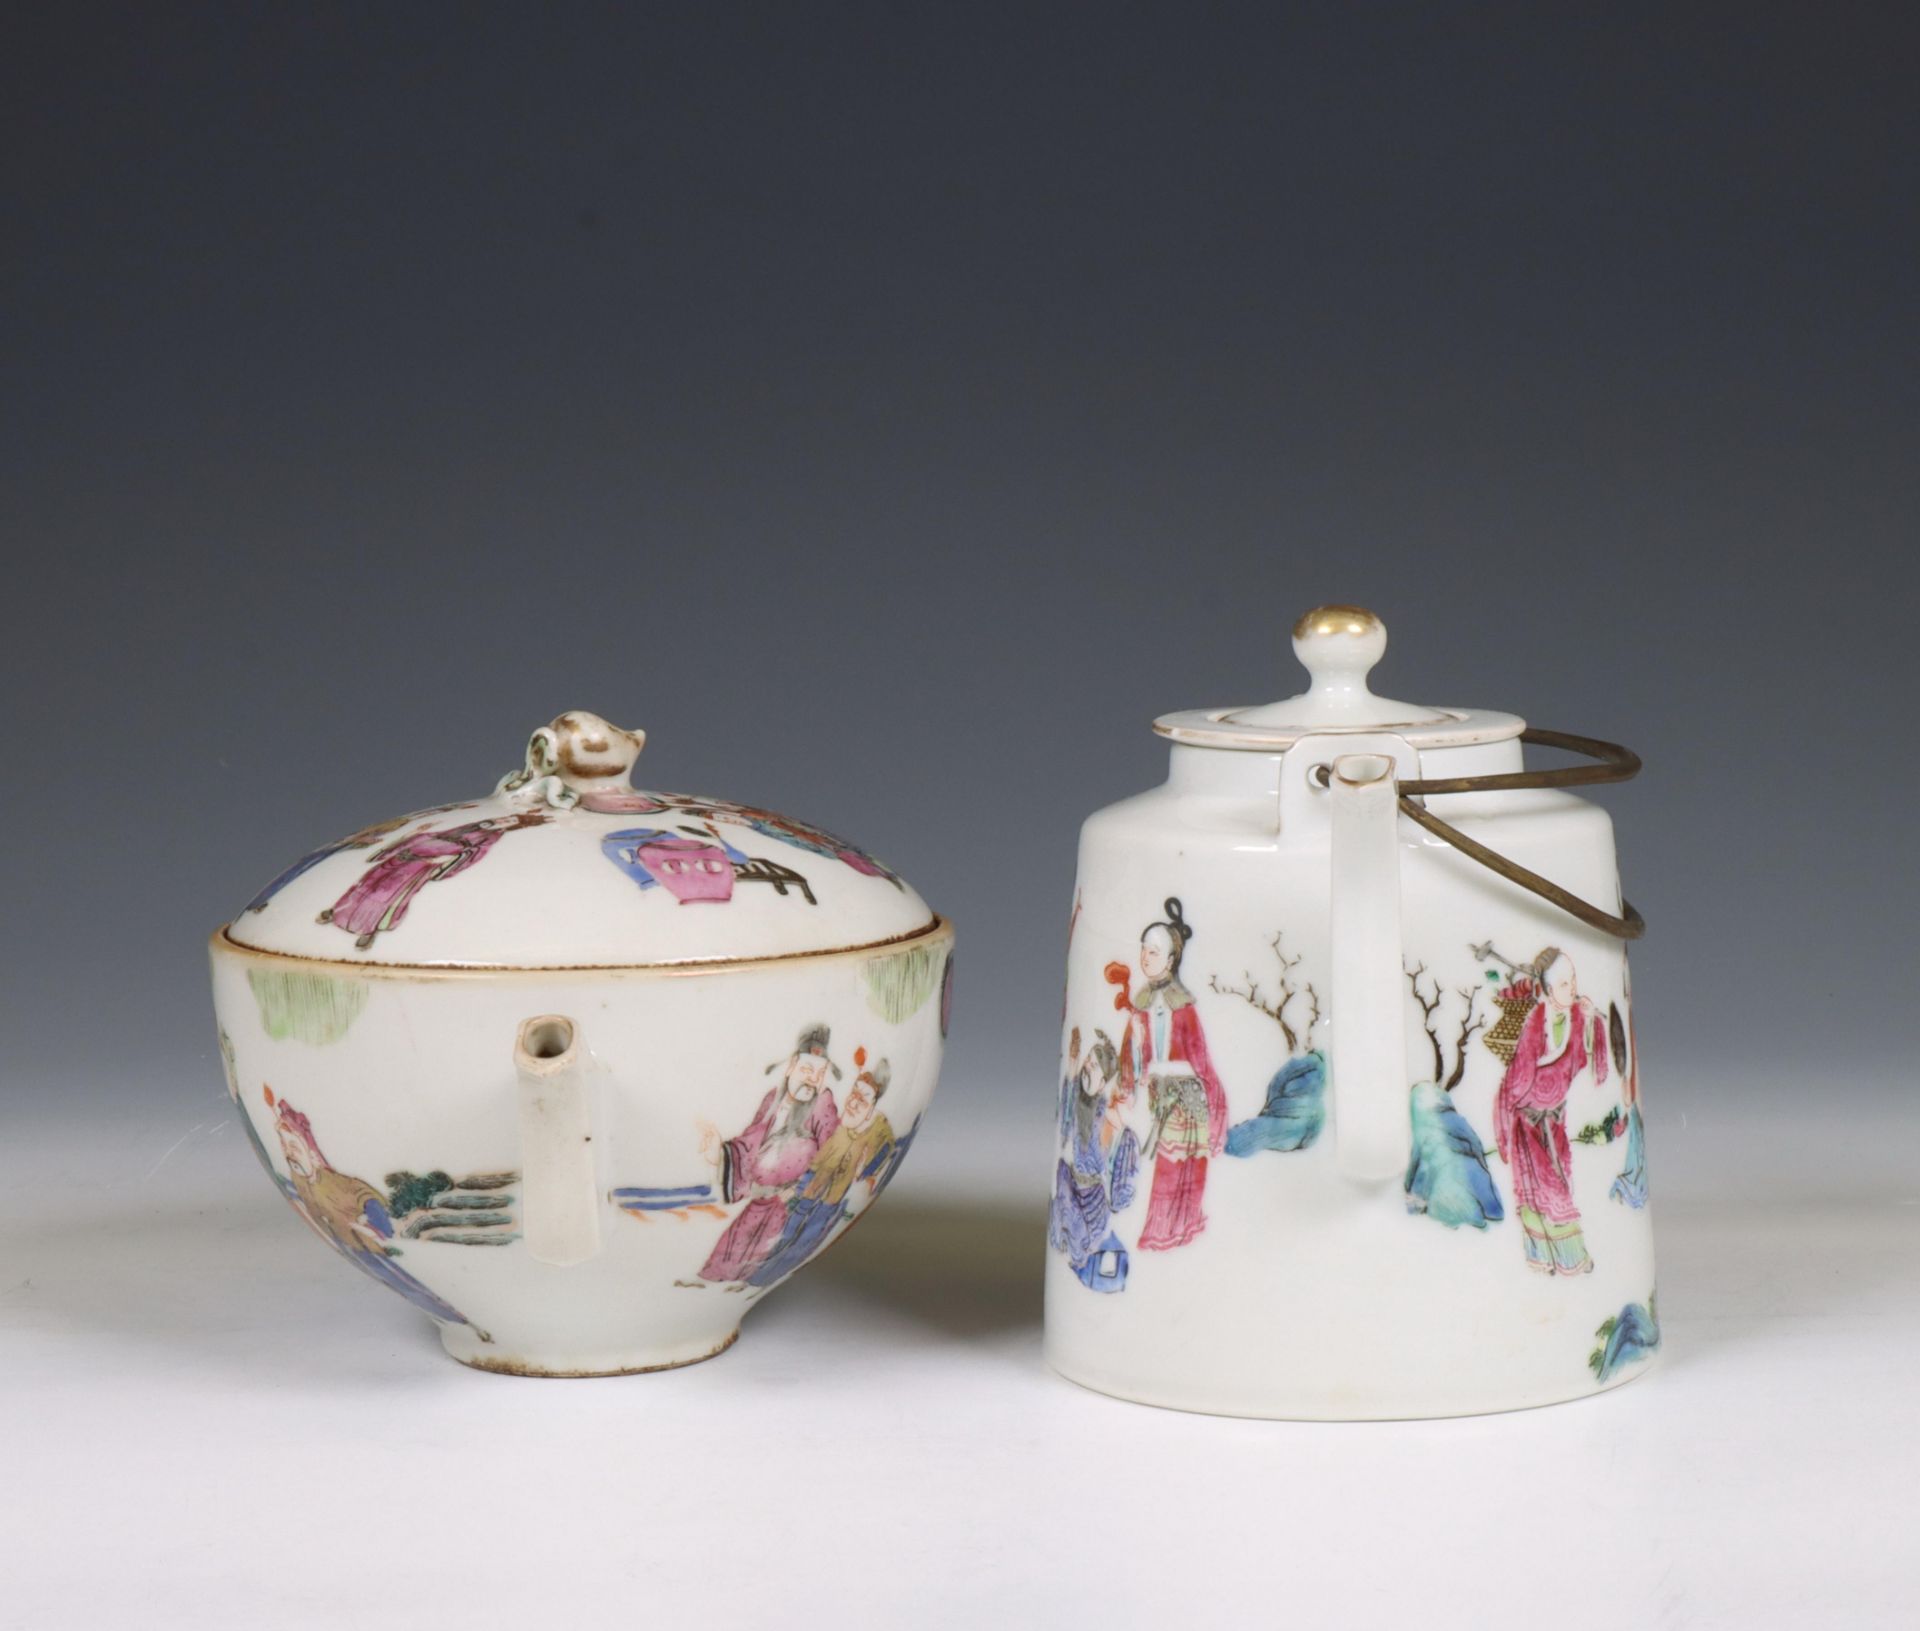 China, two famille rose porcelain teapots and covers, 19th/ 20th century, - Image 3 of 6